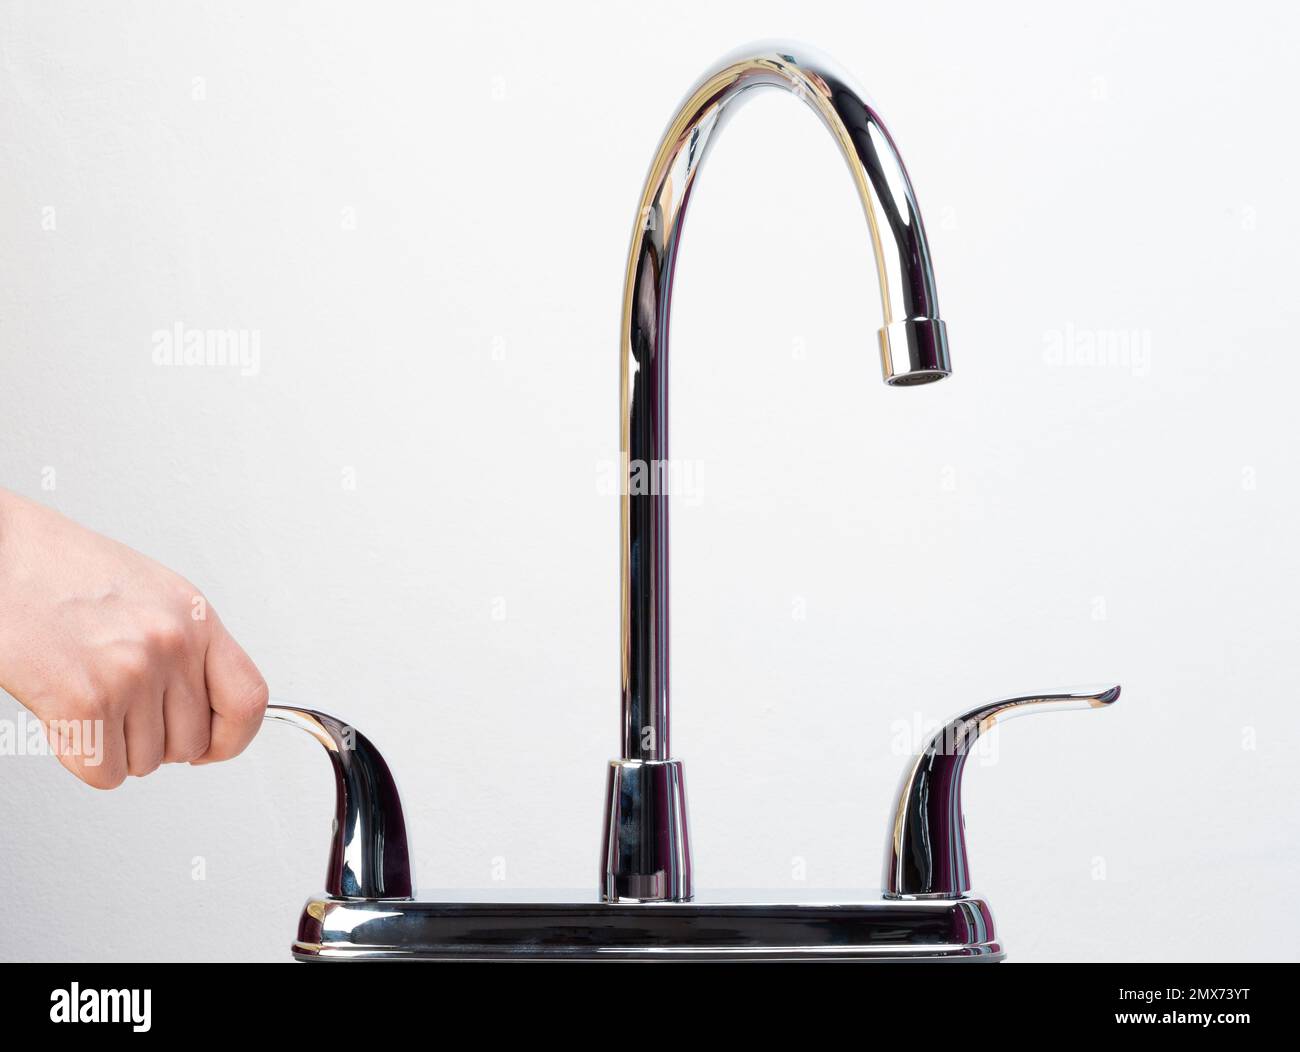 Shut kitchen faucet with moving handle mixer isolated Stock Photo